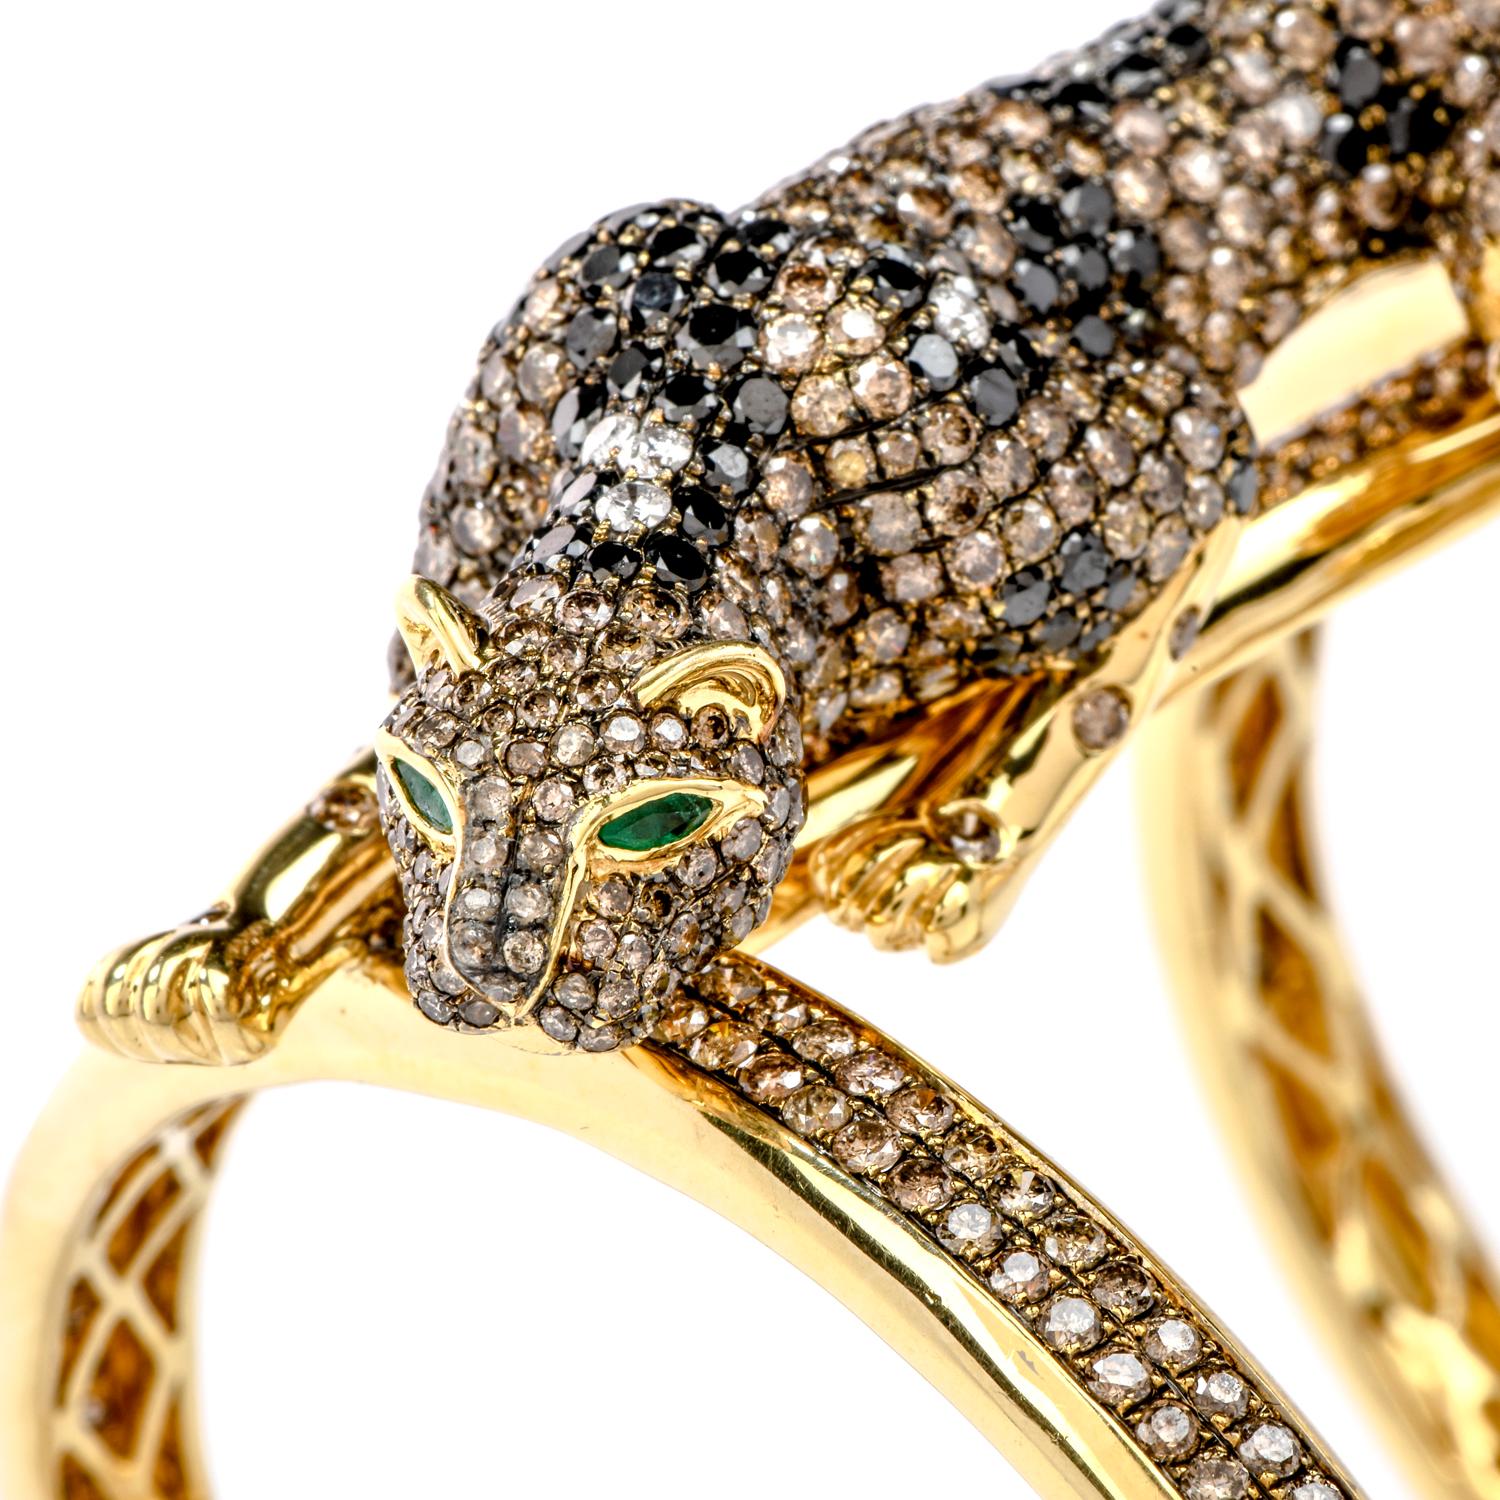 Live life to the fullest extent with this luxurious Estate Diamond Emerald 18K Gold Large Panther Cuff Bangle Bracelet! 

This 18 karat yellow gold crafted bangle bracelet was inspired by a panther motif.  The panther’s mystical eyes are represented